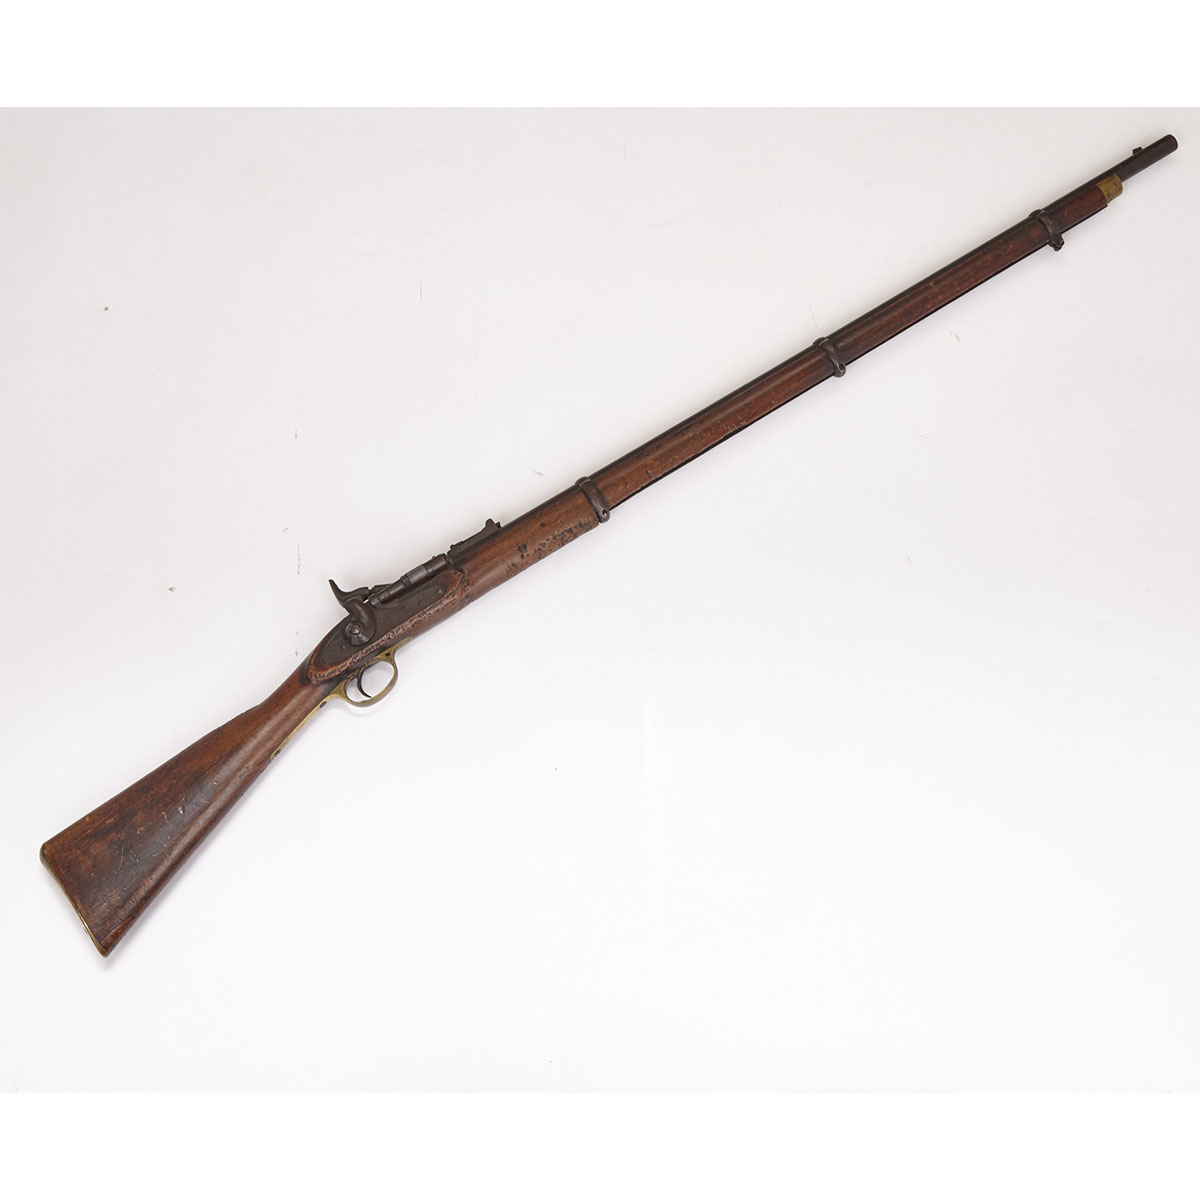 Snider Enfield Model 1853 Conversion Rifle, 1864